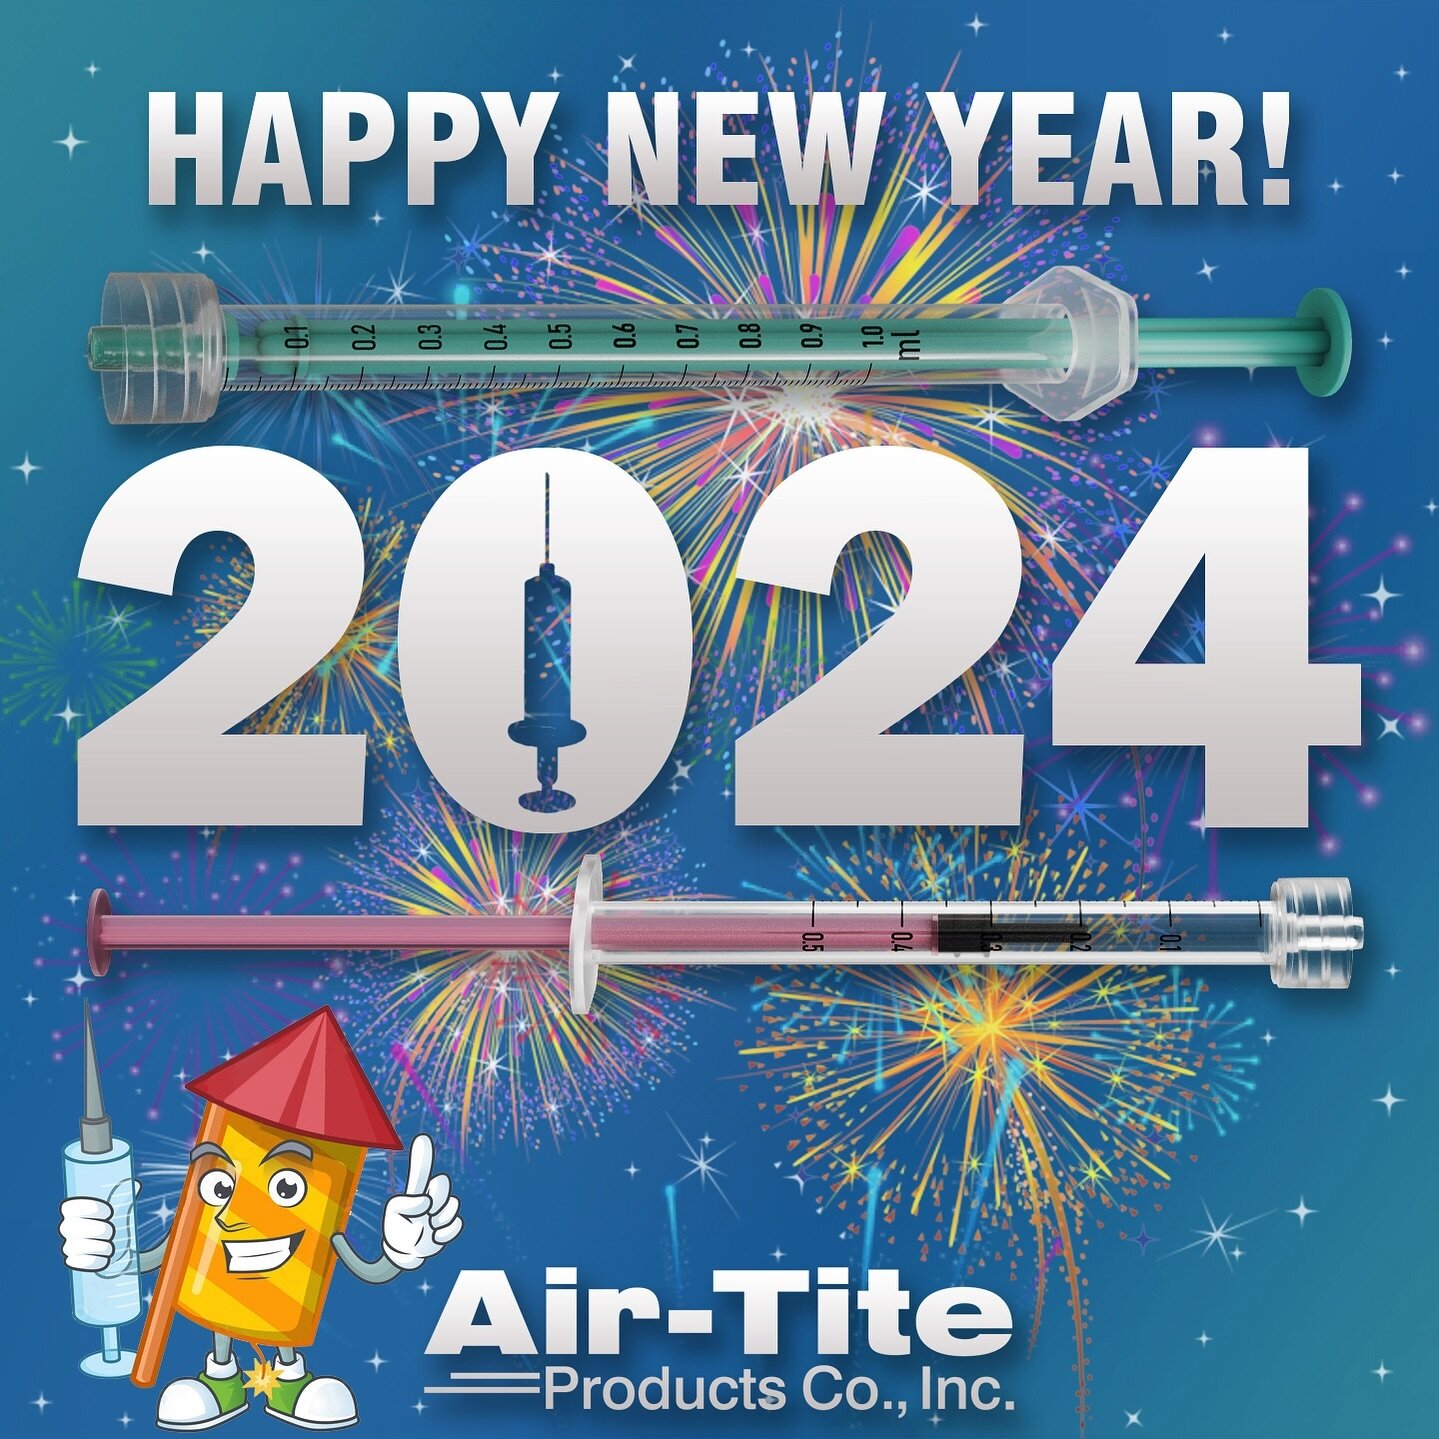 Thank you to all of our wonderful customers, distribution partners, and suppliers that helped make 2023 an incredible year! We wish you all the very best for the New Year! Here&rsquo;s to a happy, healthy, and successful 2024 for you and yours! 🎉
#A